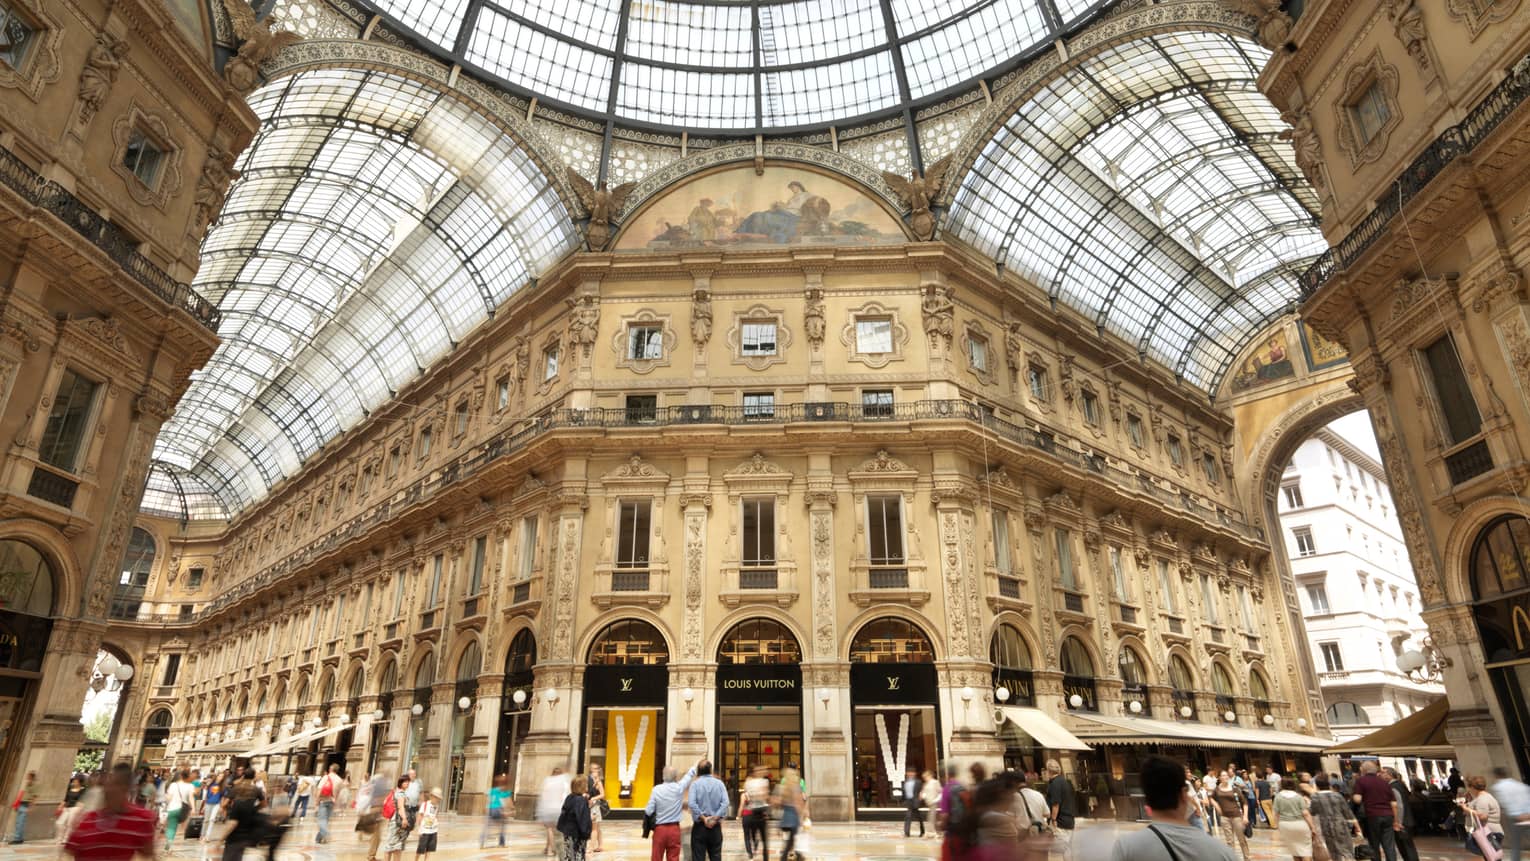 Shoppers gathered in  historic Galleria Vittorio Emanuele building with soaring ceilings, shops